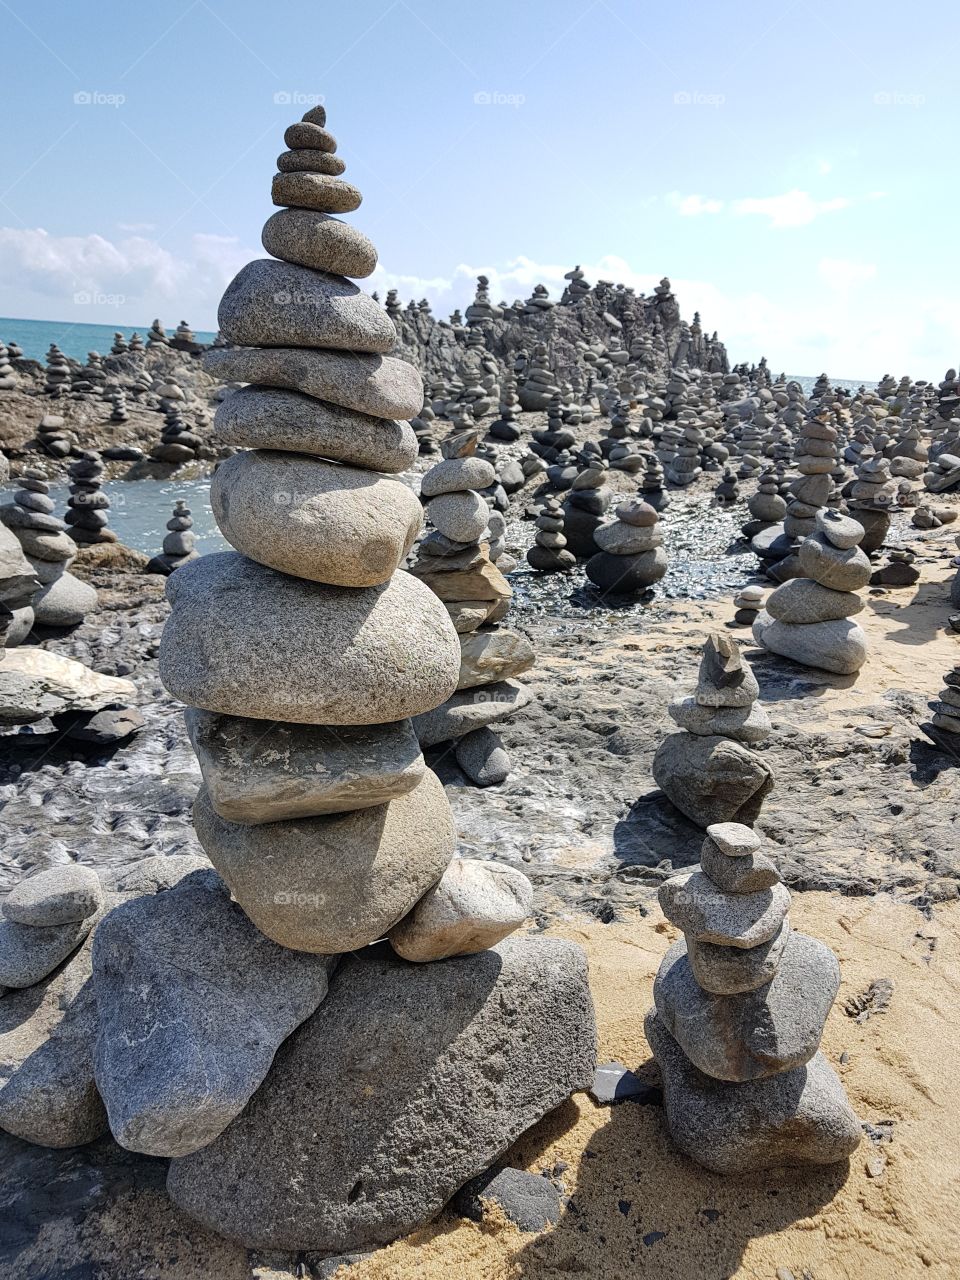 Stone formations